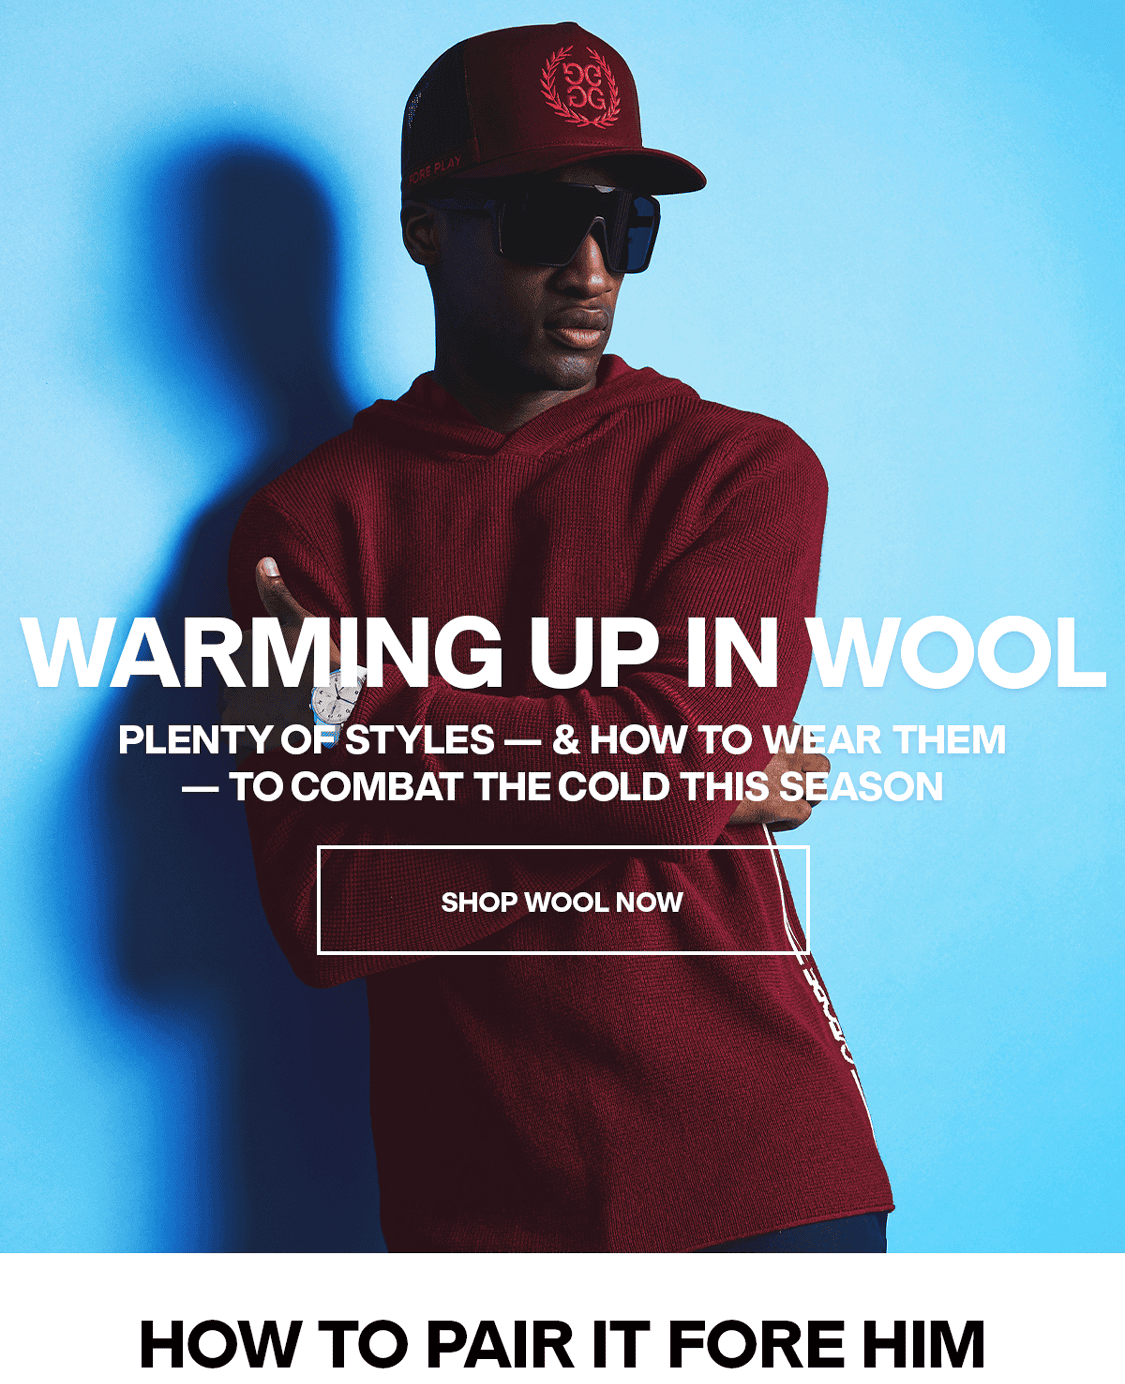 Warming Up In Wool - SHOP WOOL NOW